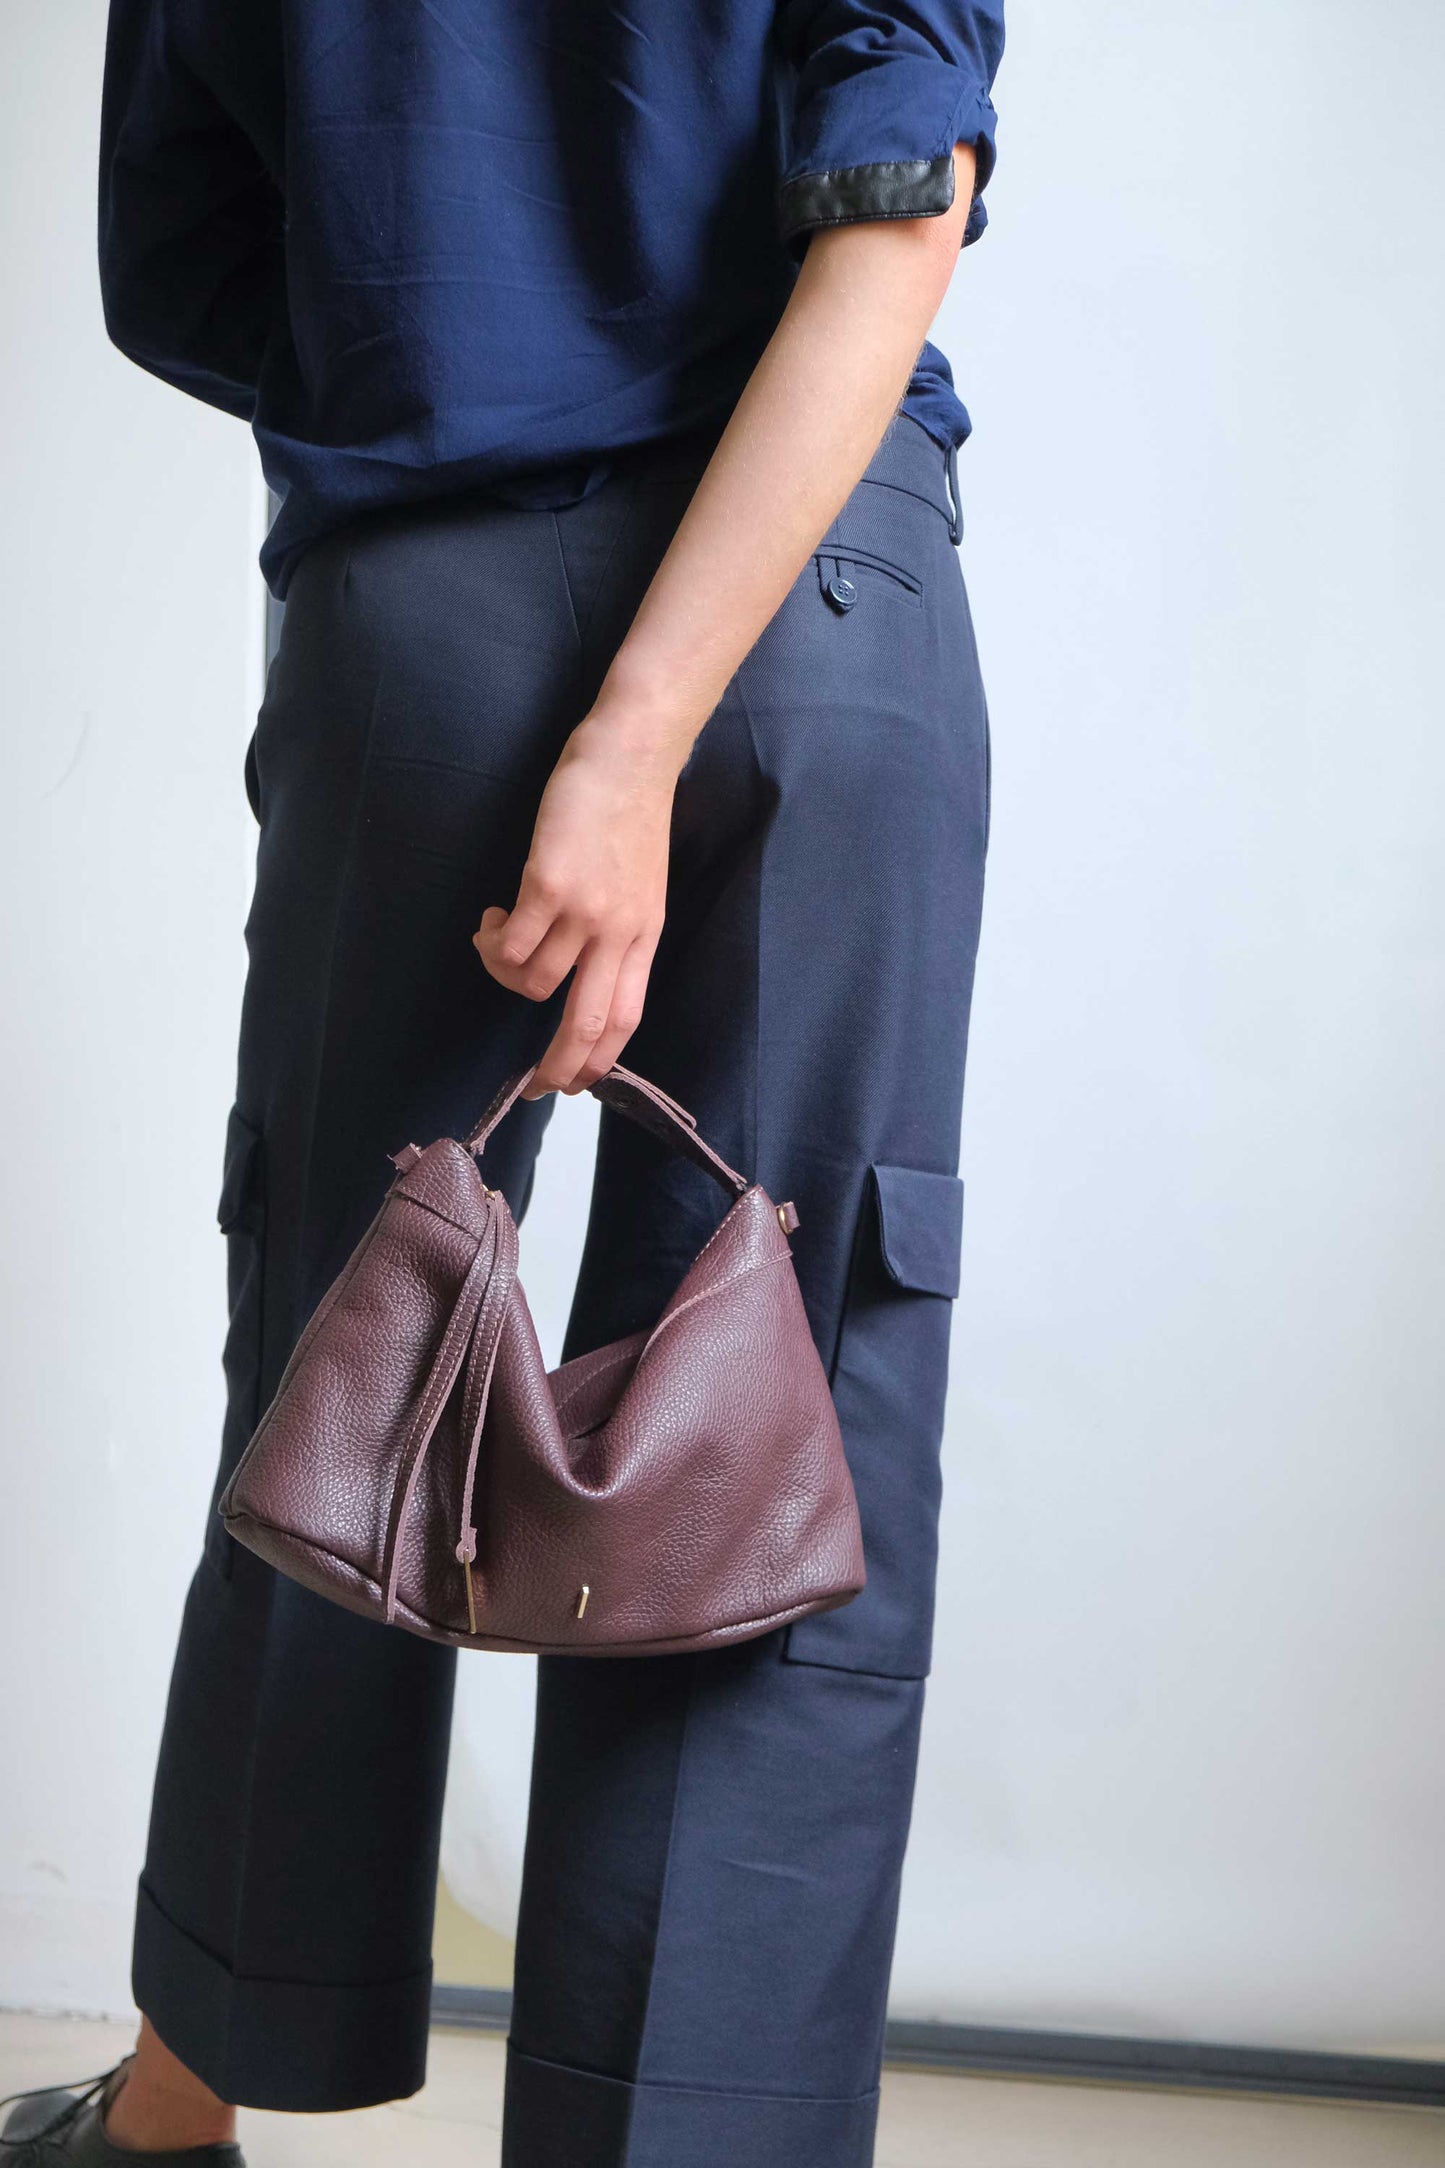 Chicca Media hobo bag in burgundy leather with natural grain